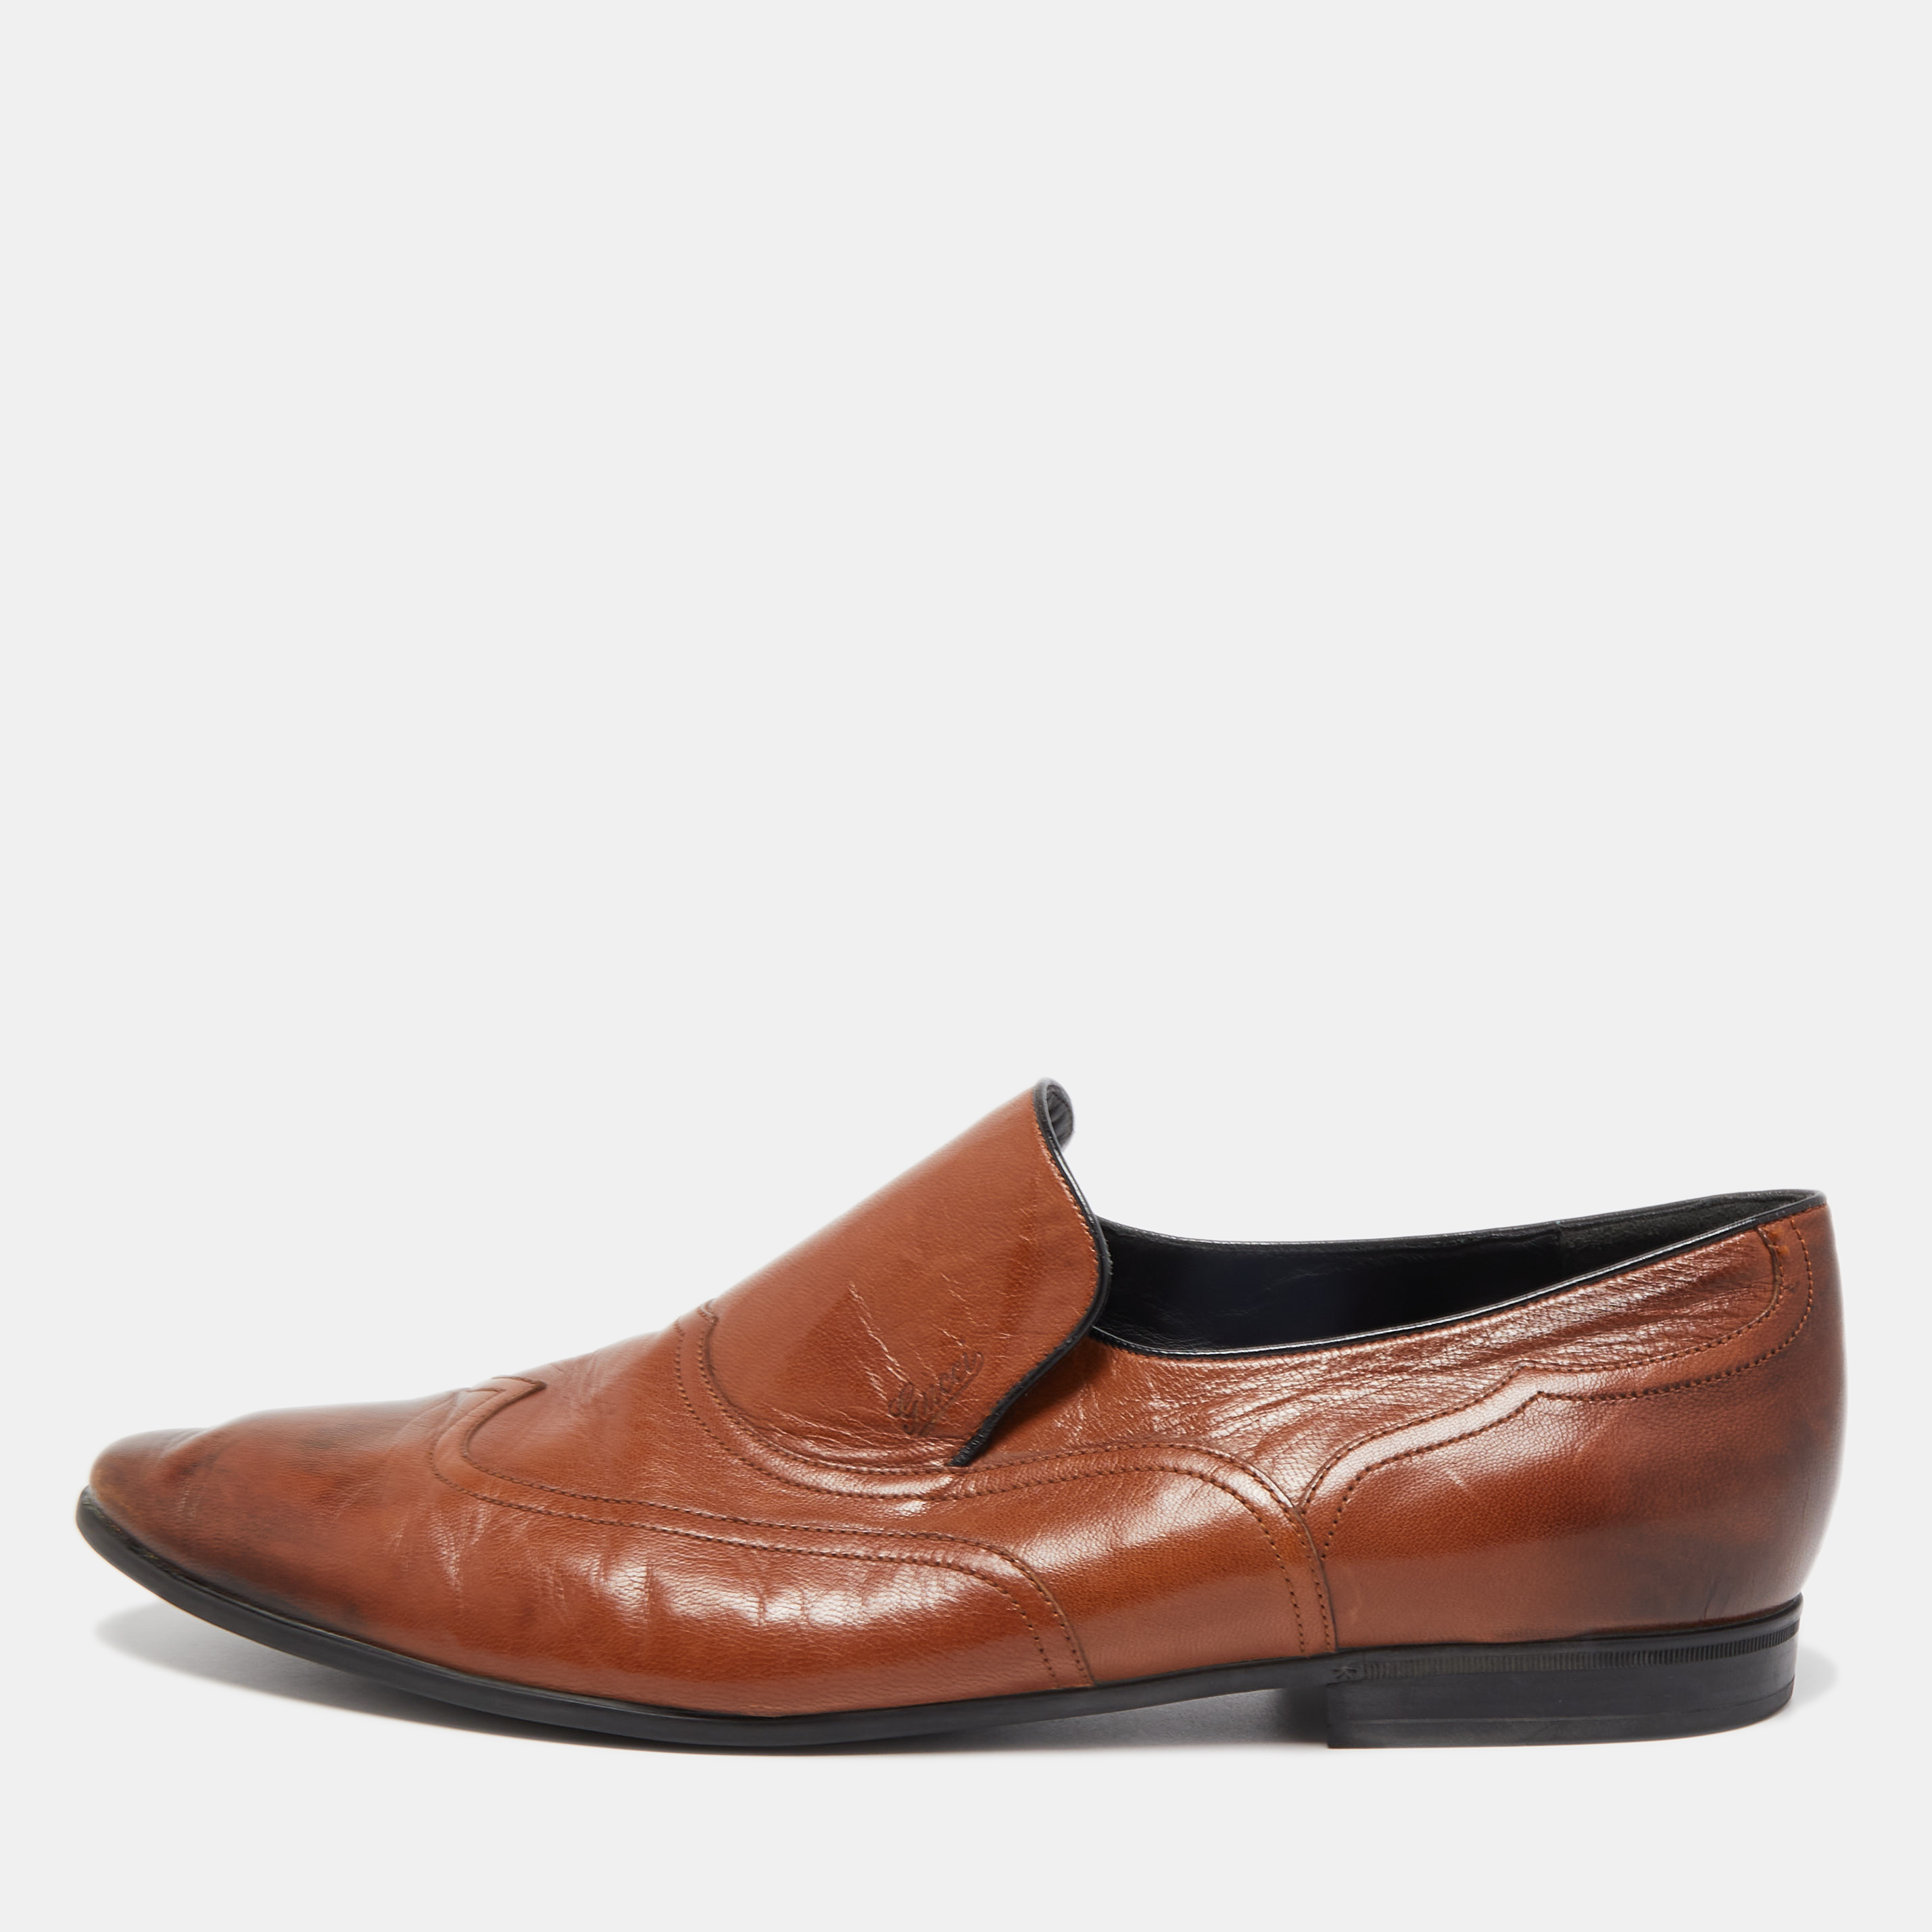 Gucci Brown Leather Slip On Loafers Size 45.5